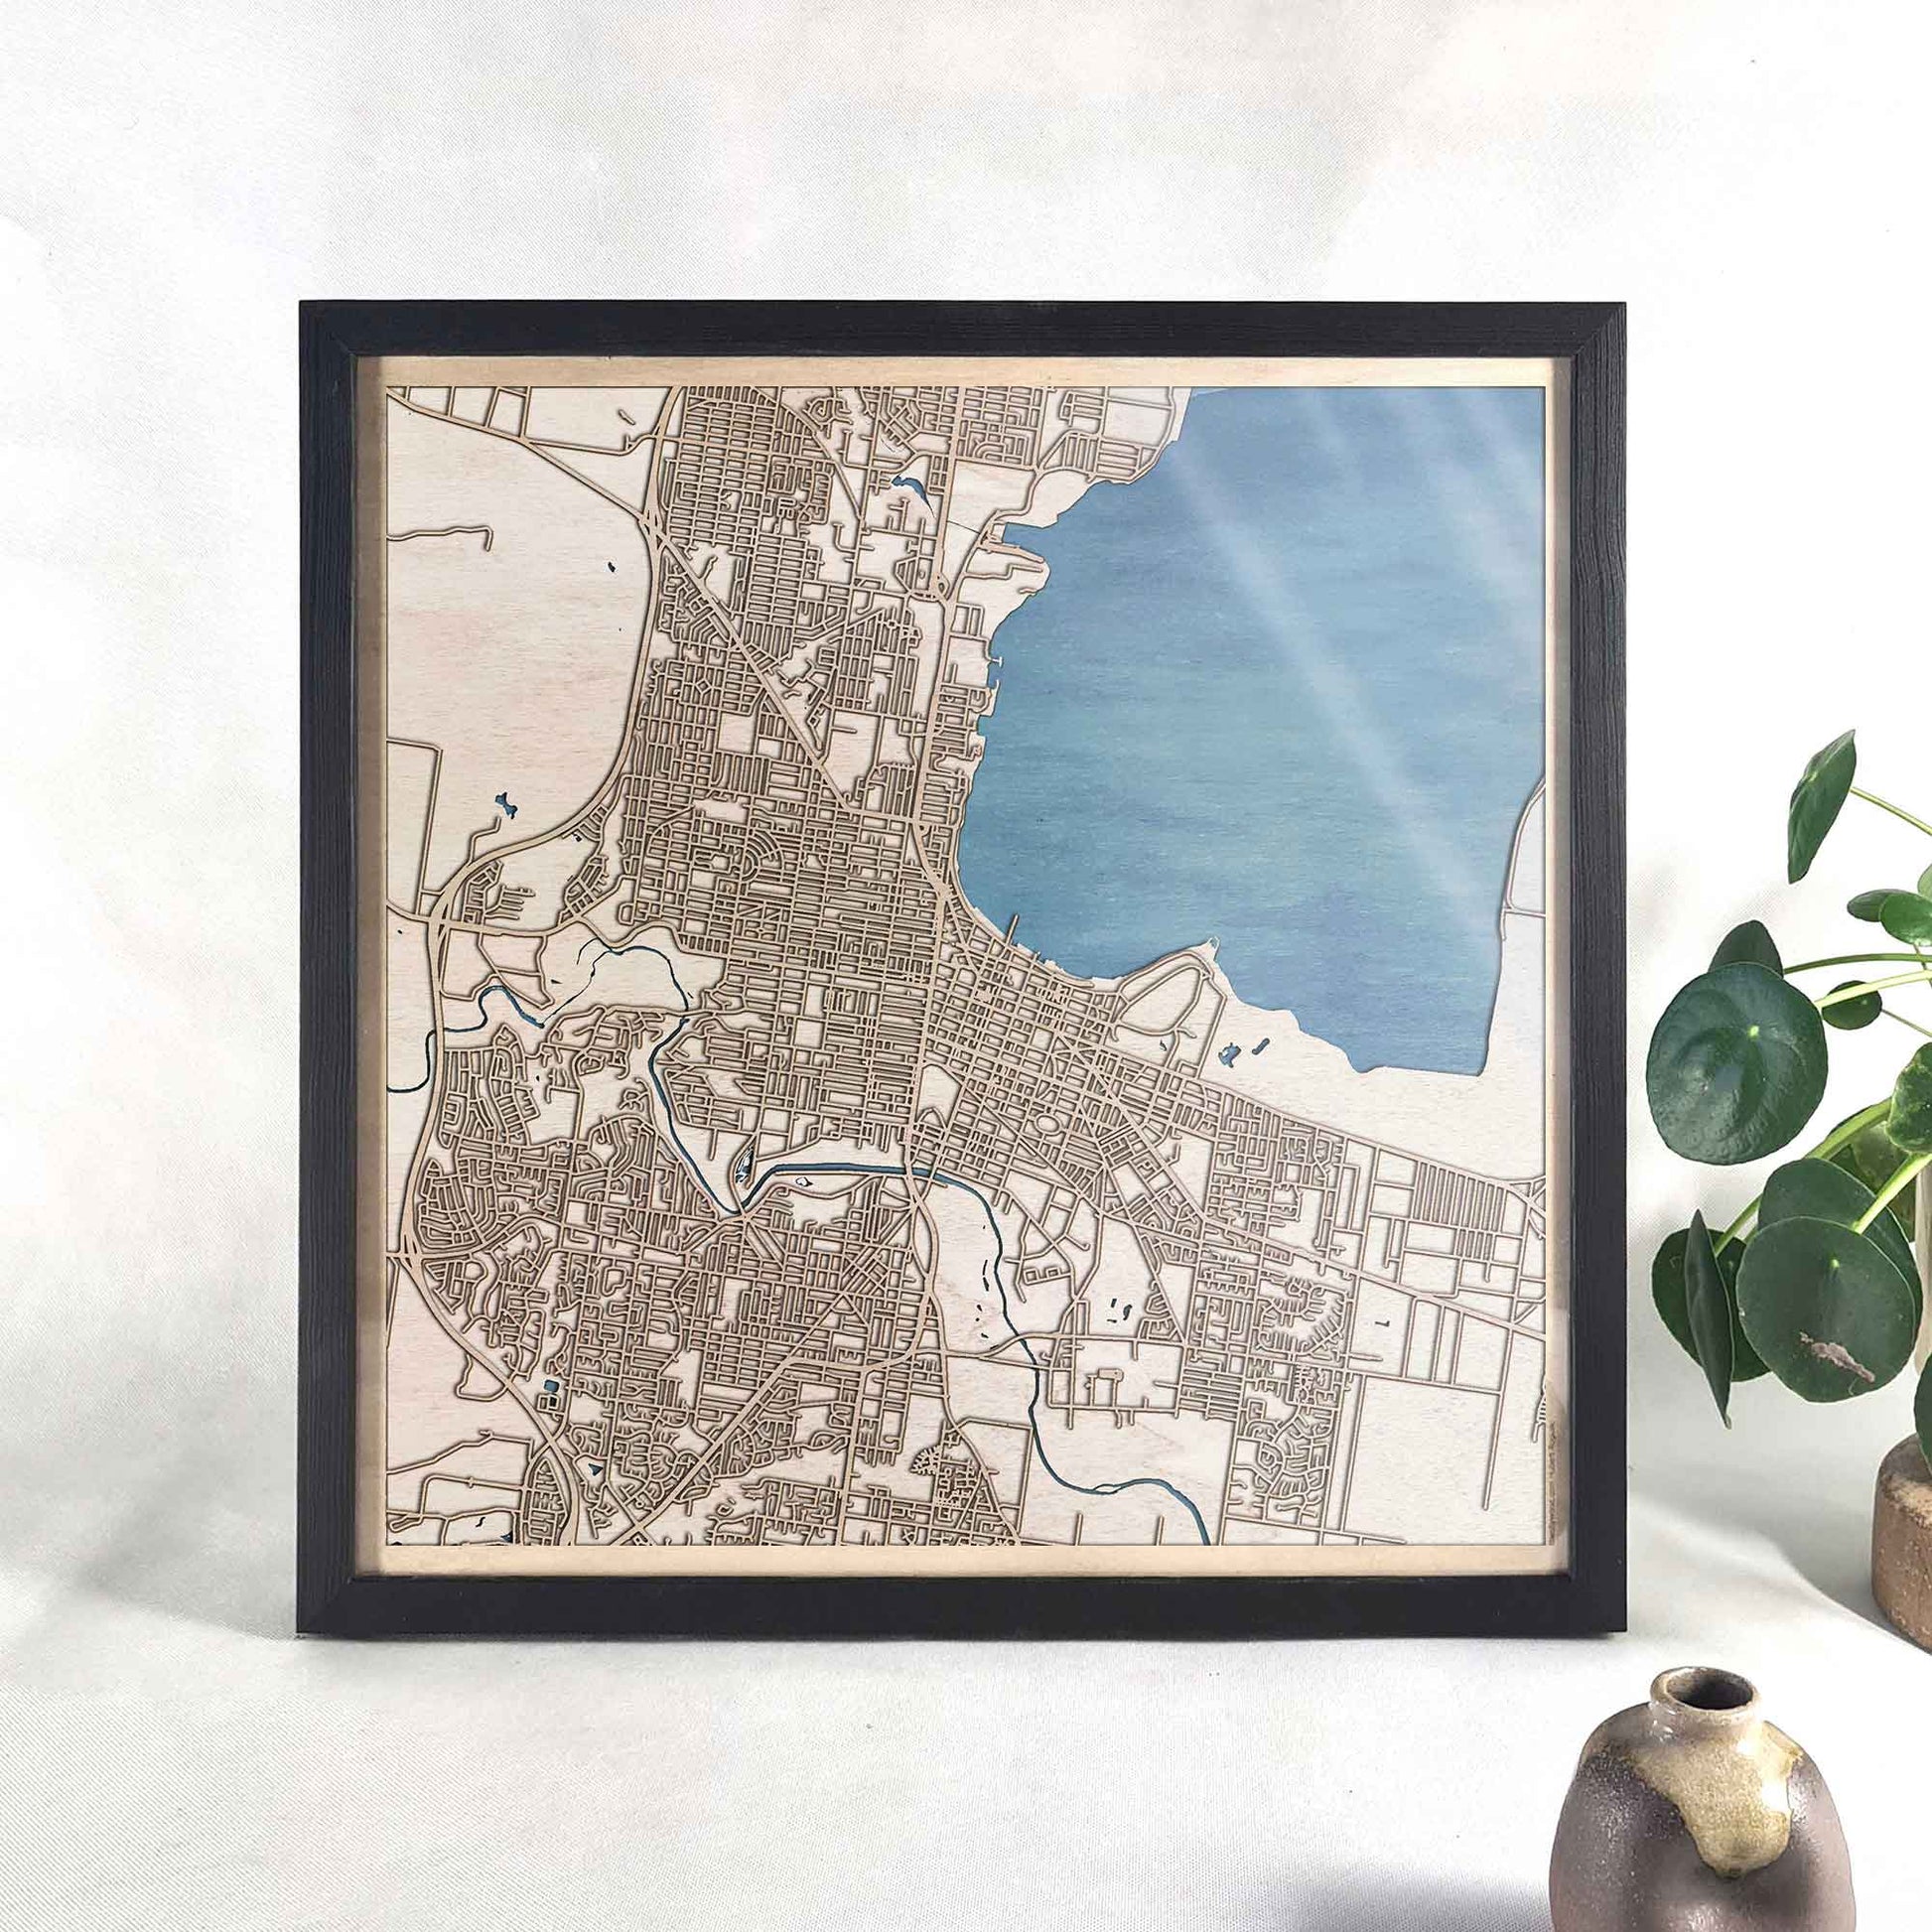 Geelong Wooden Map by CityWood - Custom Wood Map Art - Unique Laser Cut Engraved - Anniversary Gift